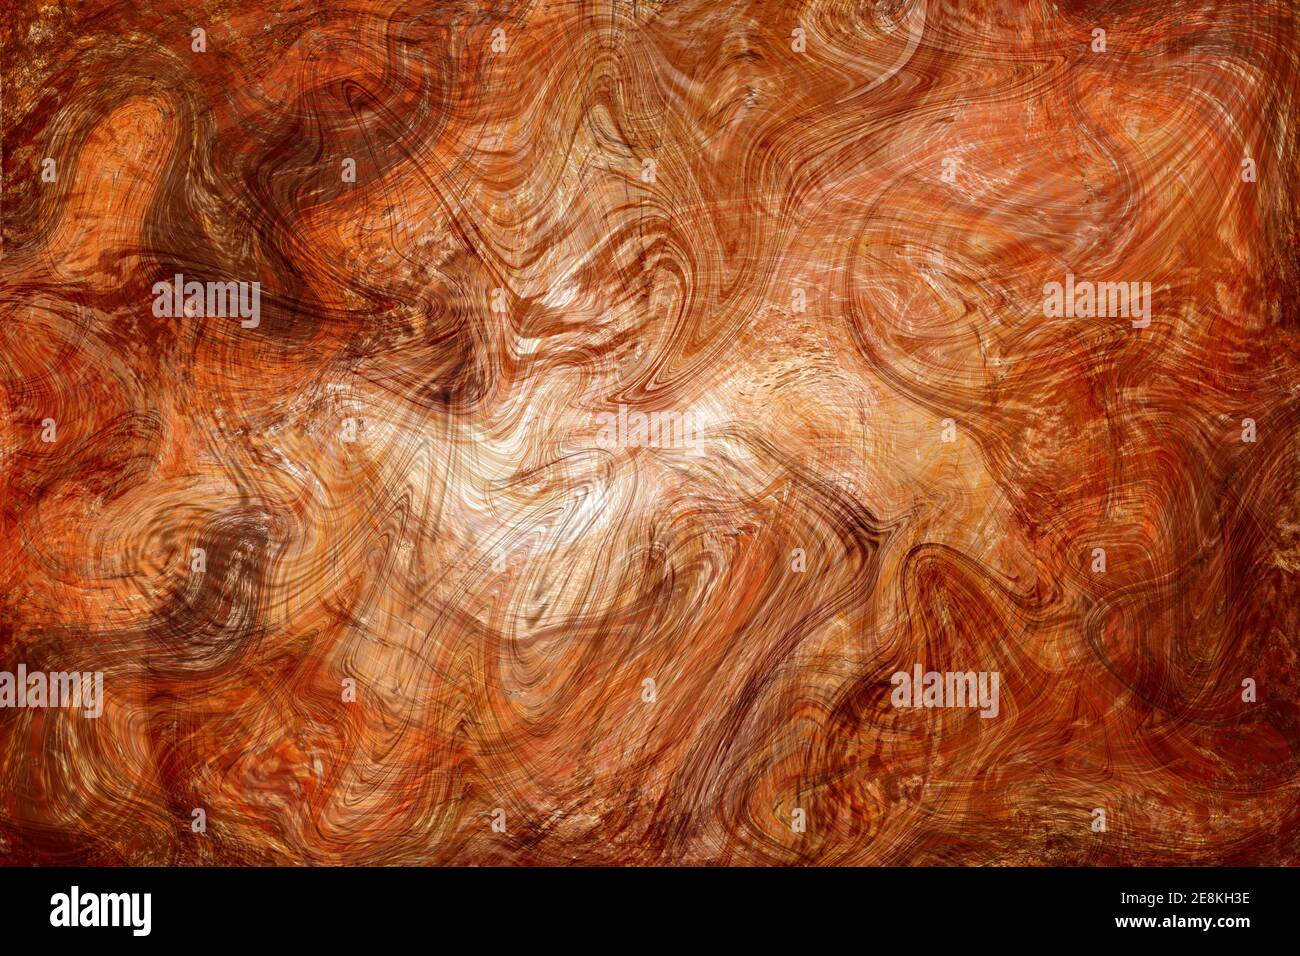 Orange brown fluid illustration. Digital marbling card. Abstract amber fluid art background. Marble textile print or paper cover. Jasper stone station Stock Photo